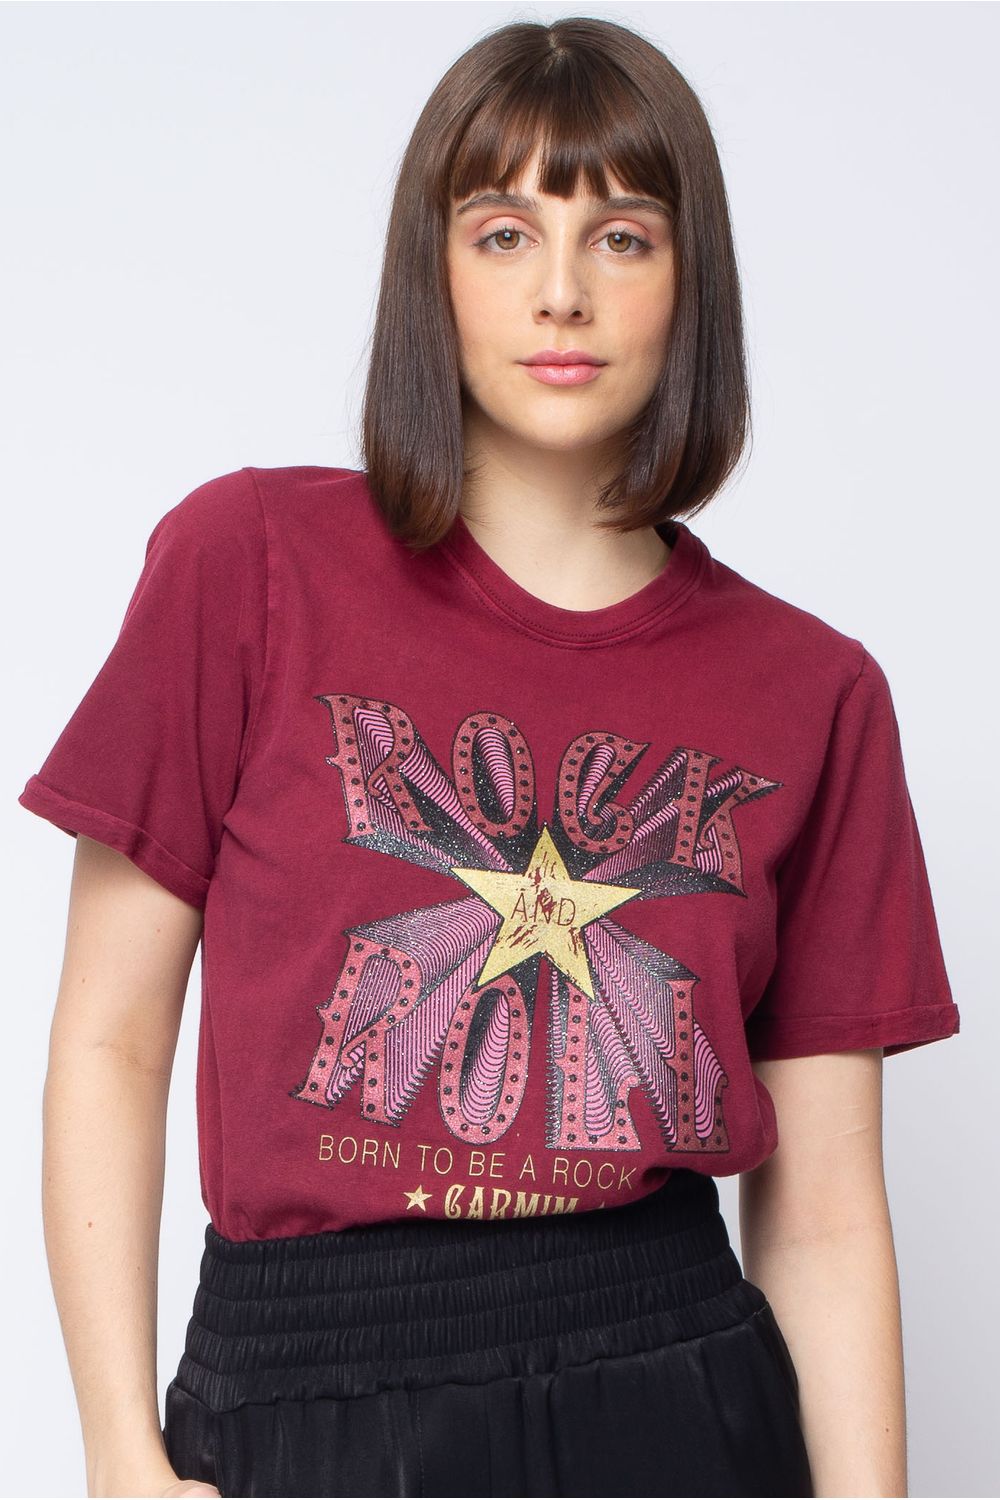 T-SHIRT-ROCK-AND-ROLL-C40438